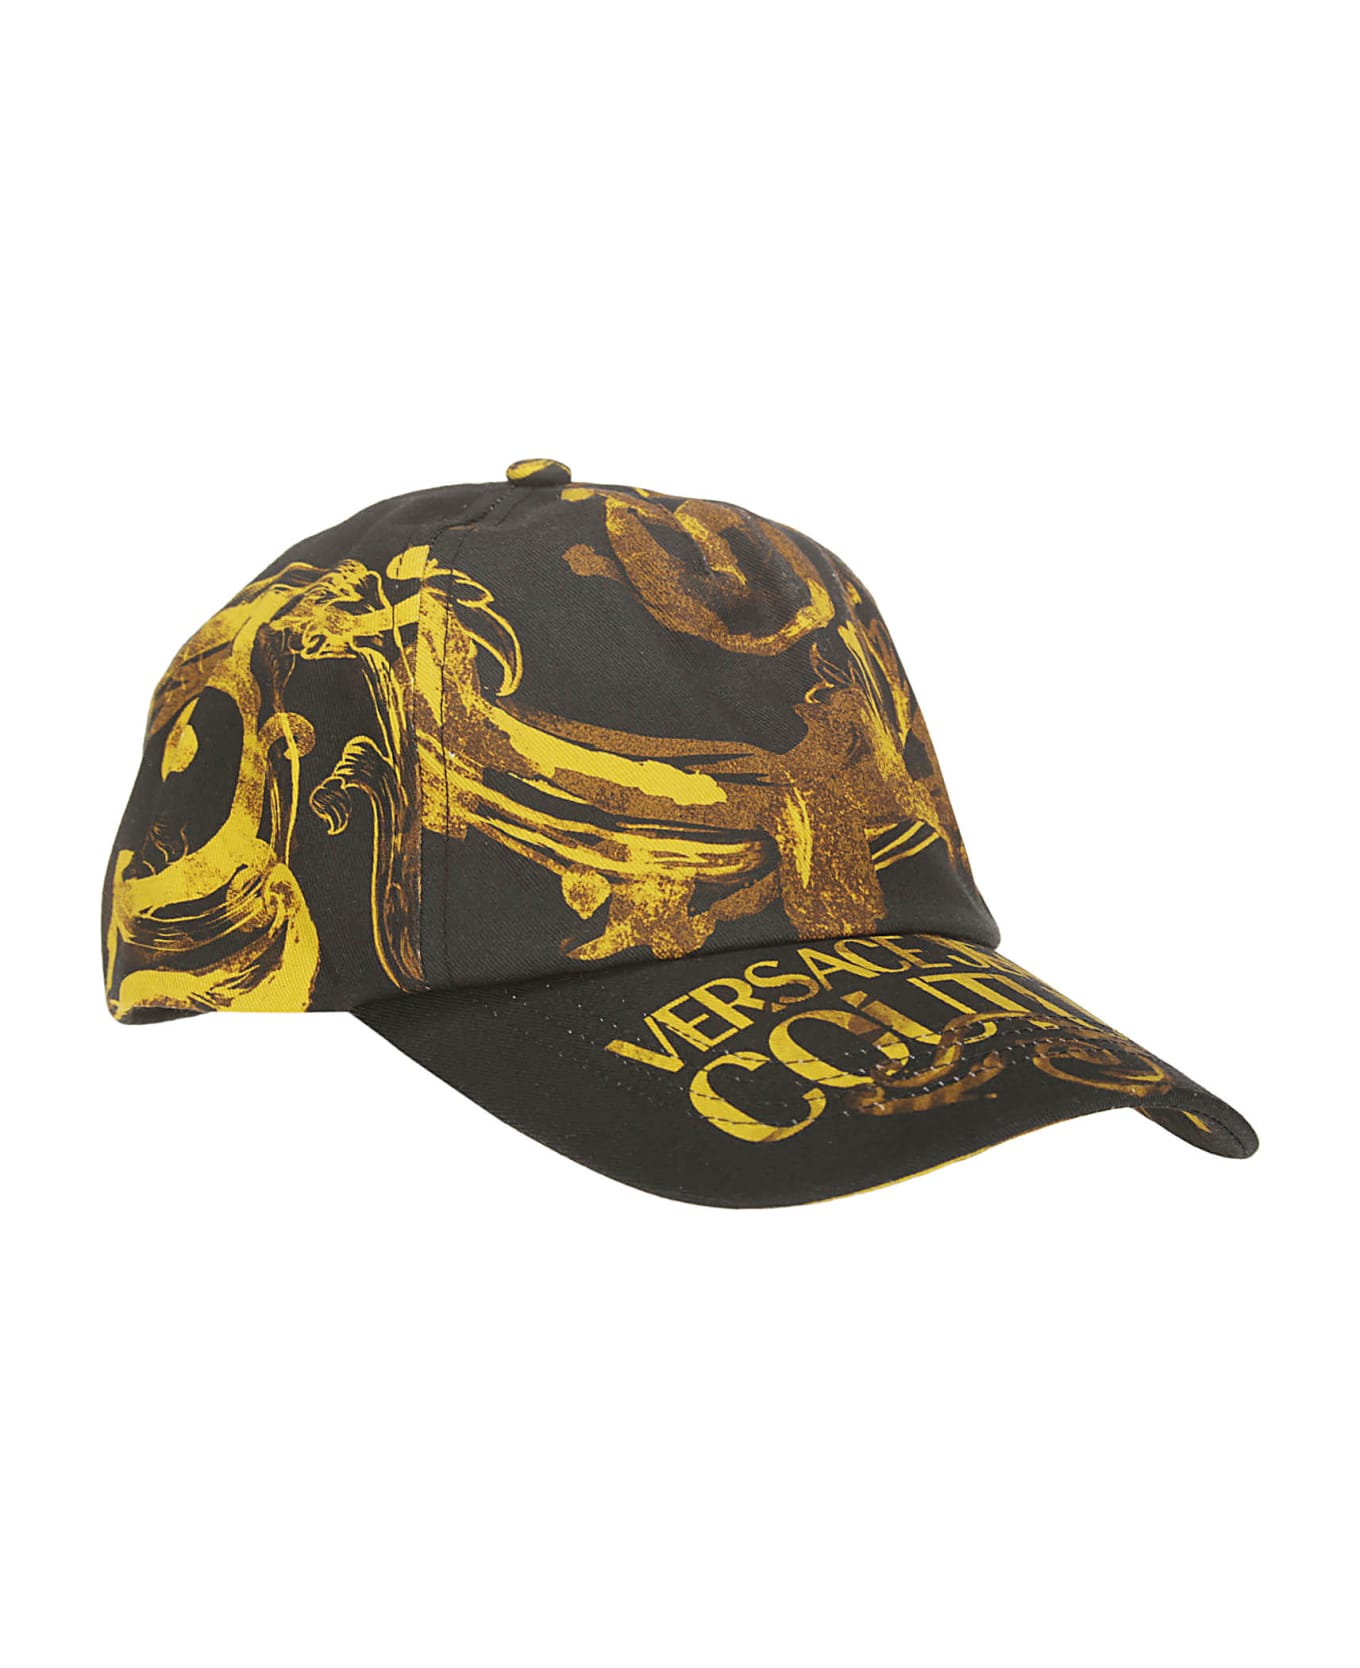 Versace Jeans Couture Baseball Cap With Pences Hat - BLACK/GOLD